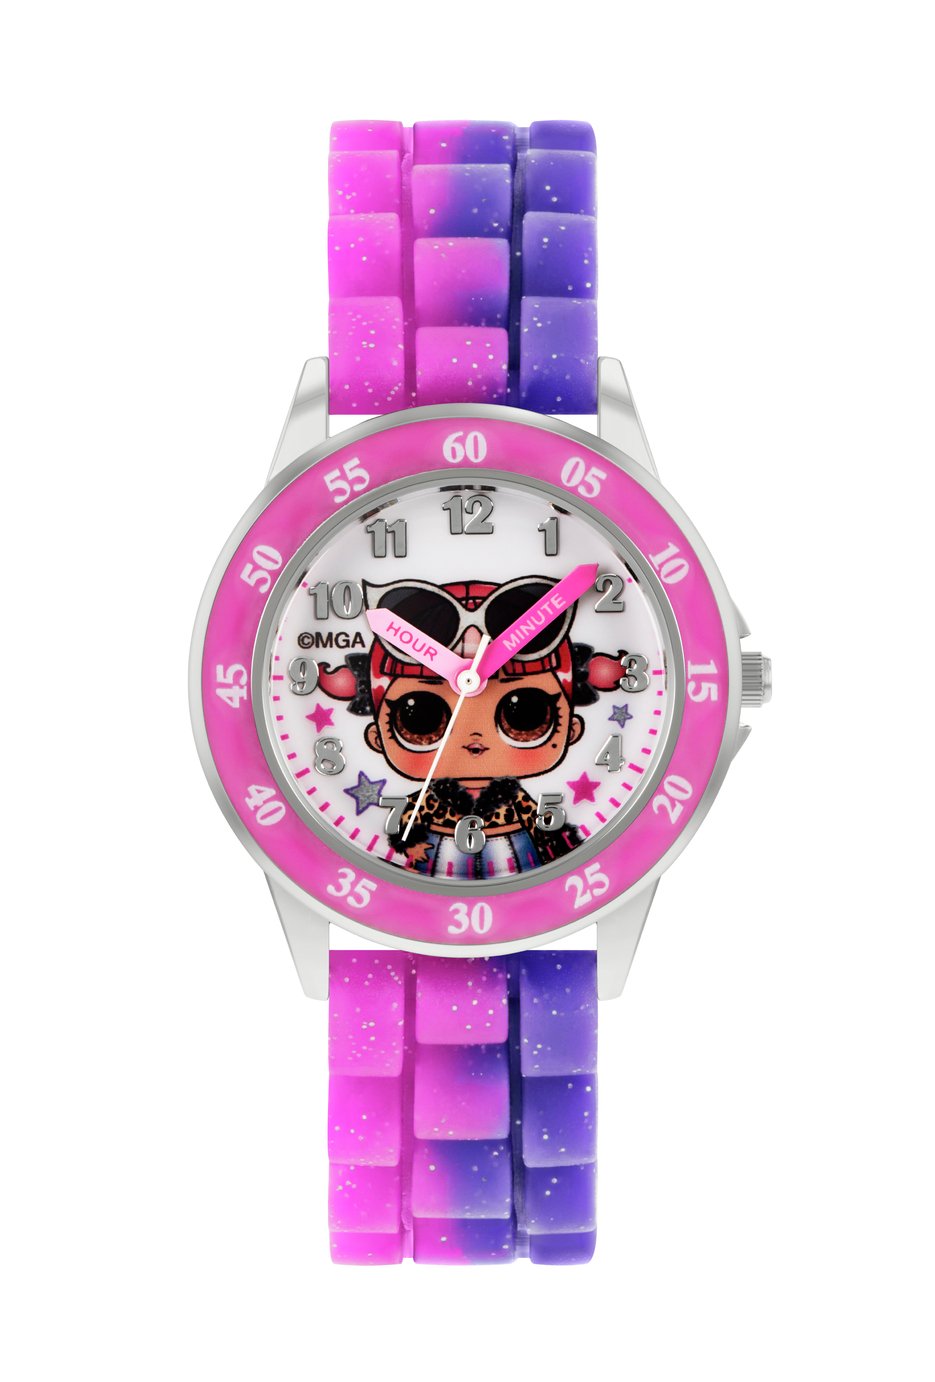 LOL Surprise Kid's Pink and Purple Silicone Strap Watch